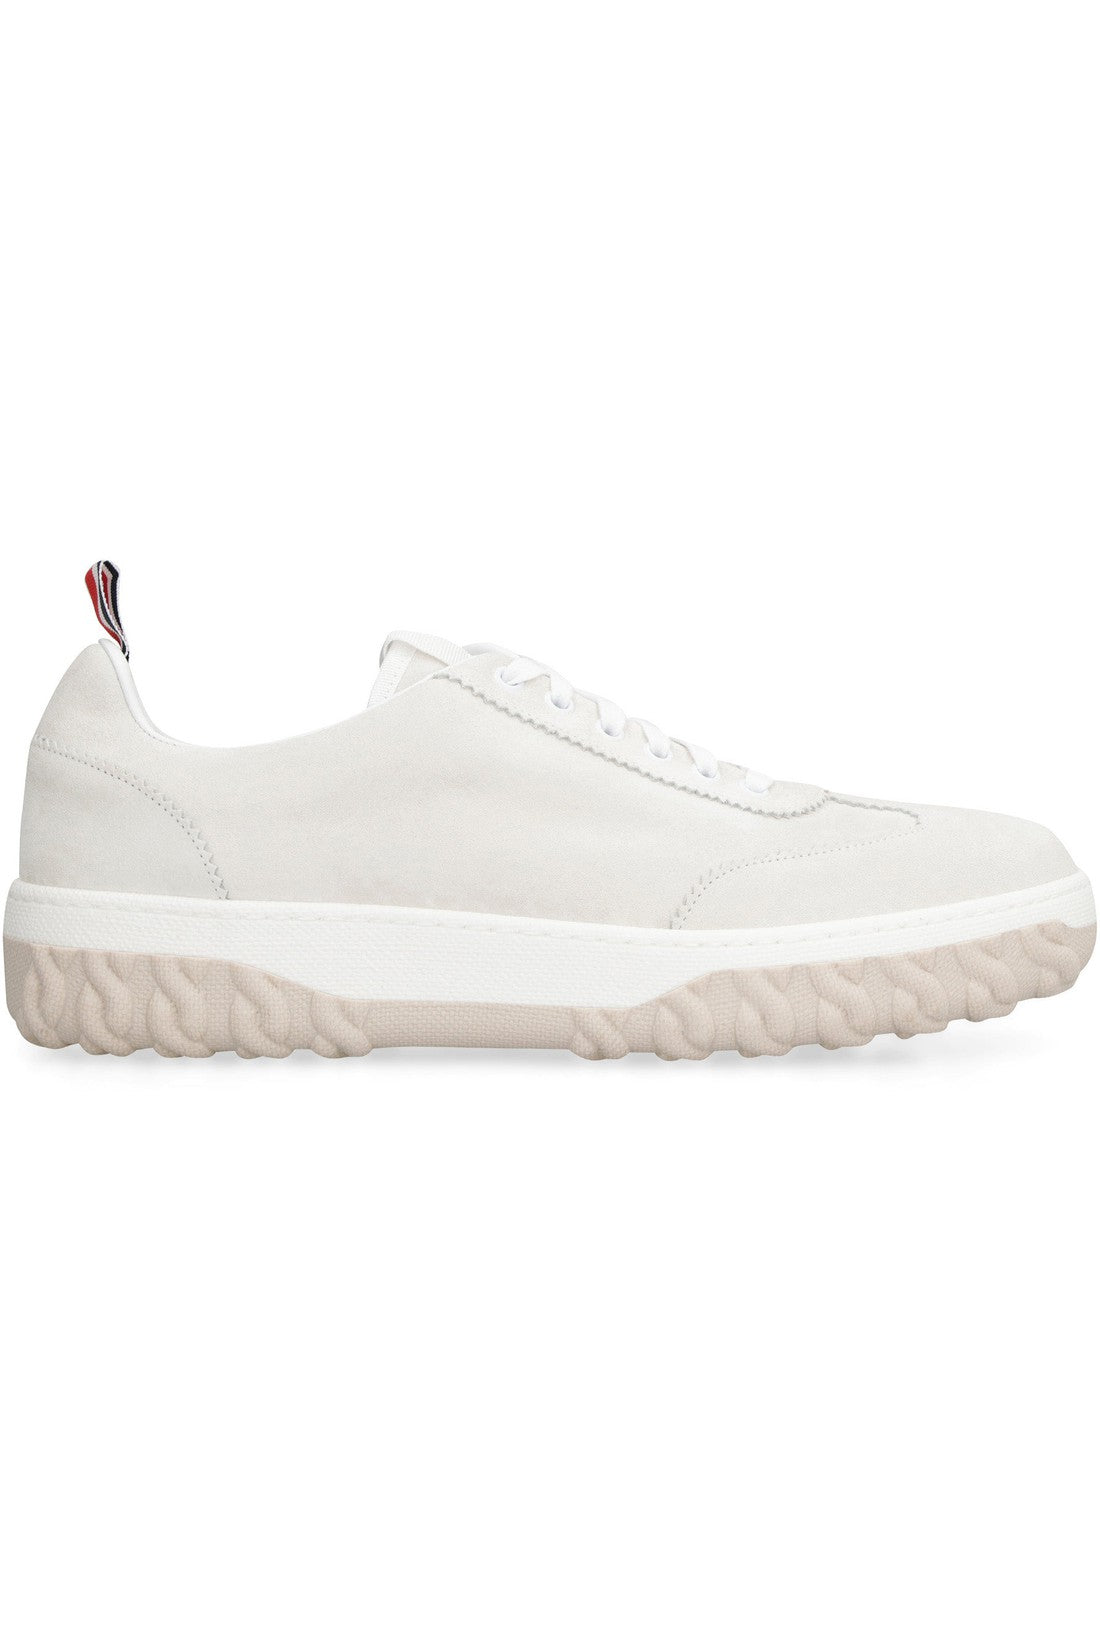 Thom Browne-OUTLET-SALE-Court low-top sneakers-ARCHIVIST